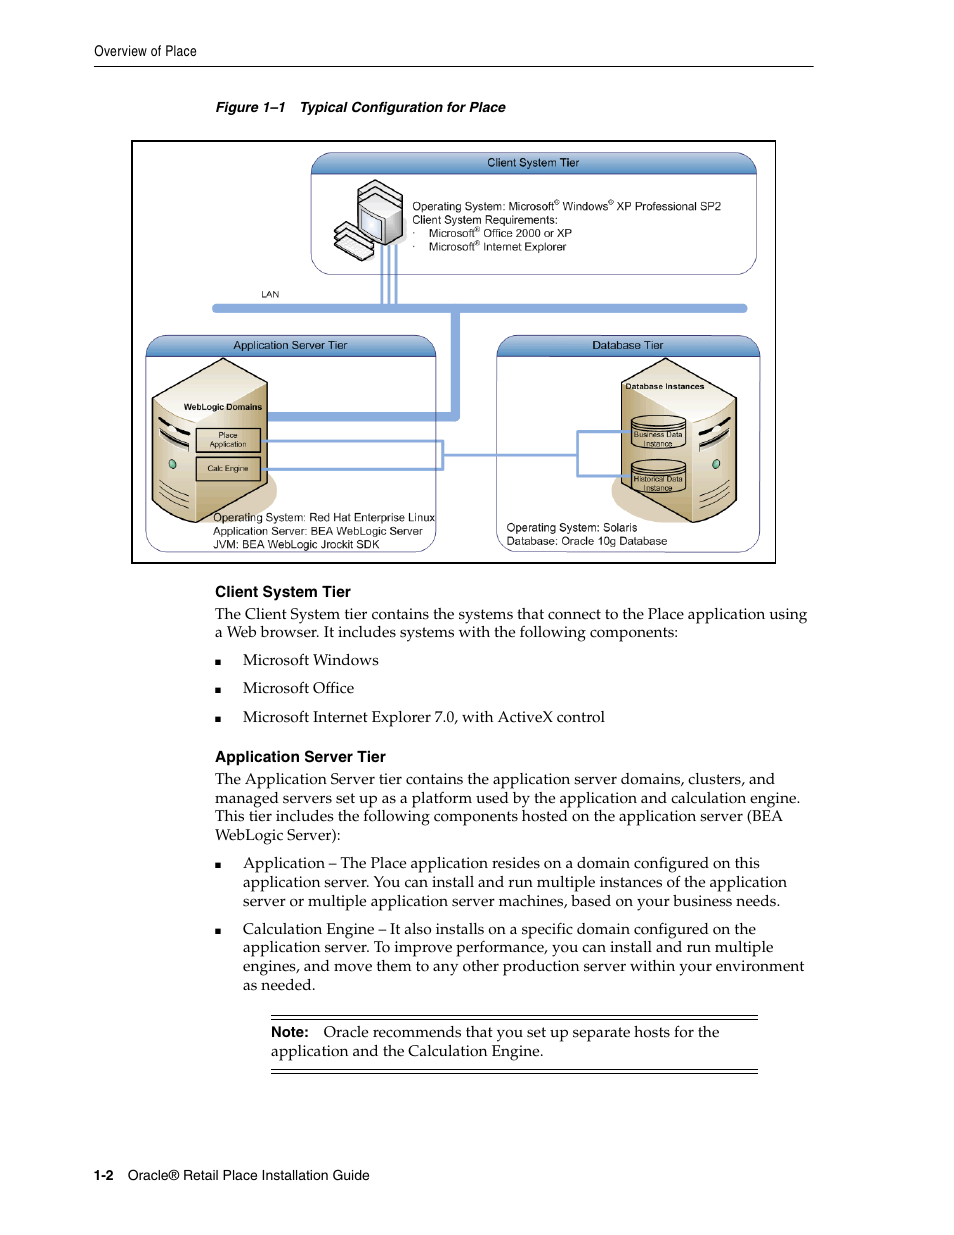 Client system tier, Application server tier | Oracle Audio Technologies Oracle Retail Place 12.2 User Manual | Page 12 / 68